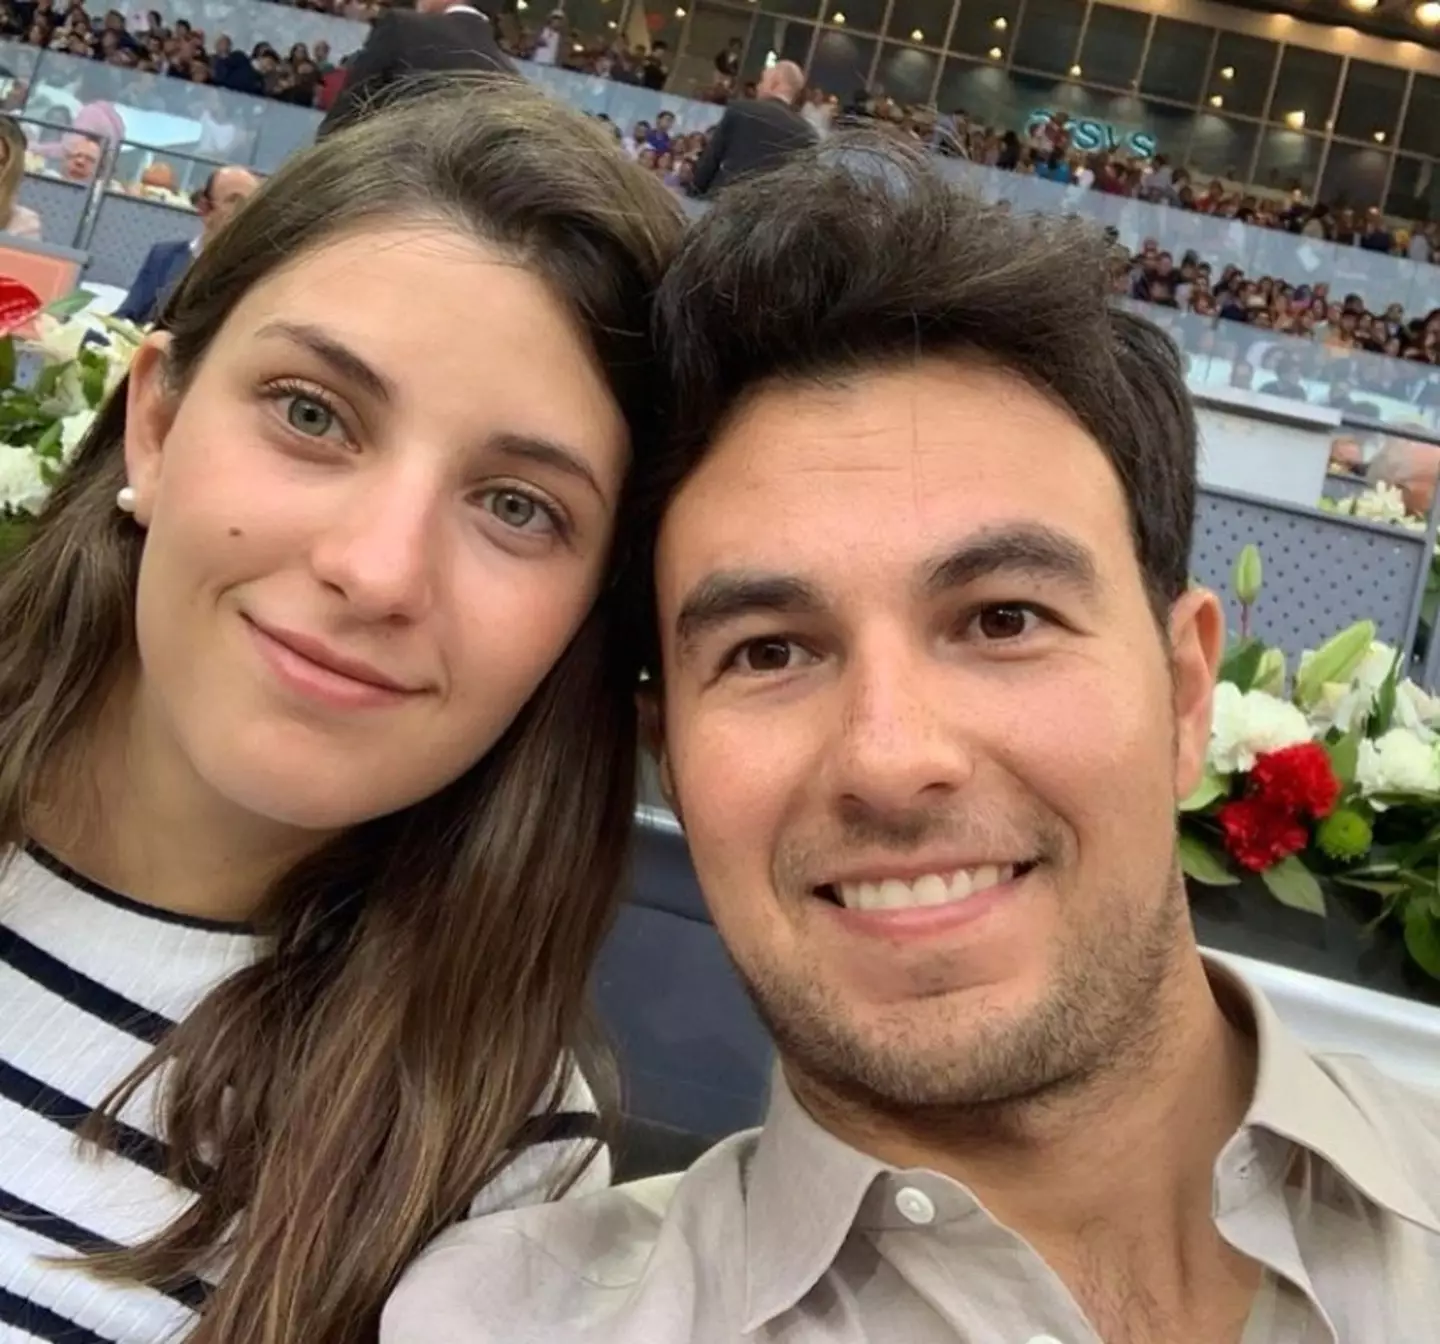 Perez insists he and his wife are 'more united than ever' (Image: Instagram/schecoperez)